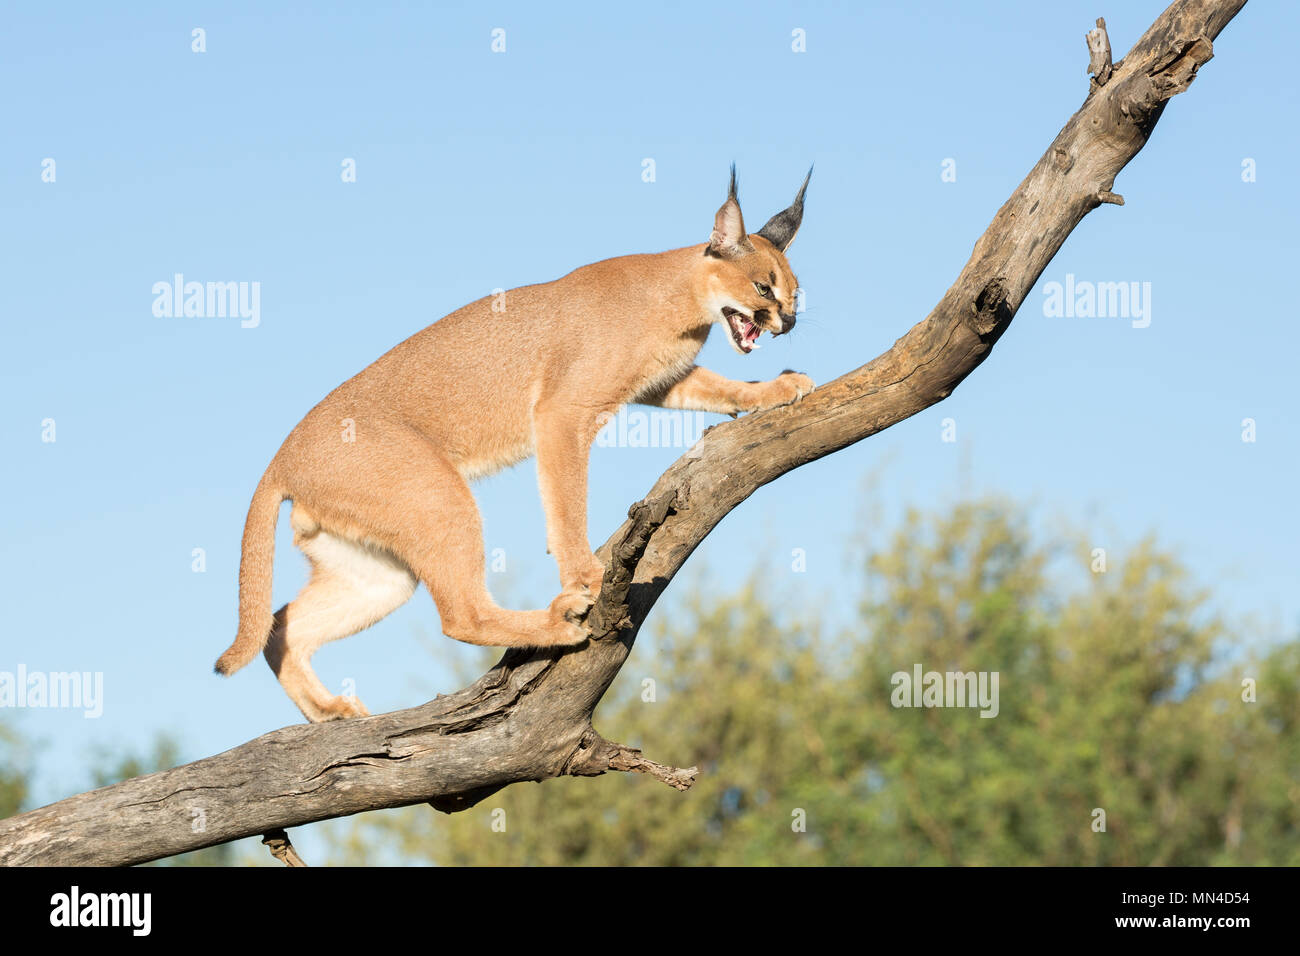 A single Caracal cat on a tree branch, snarling. South Africa Stock Photo